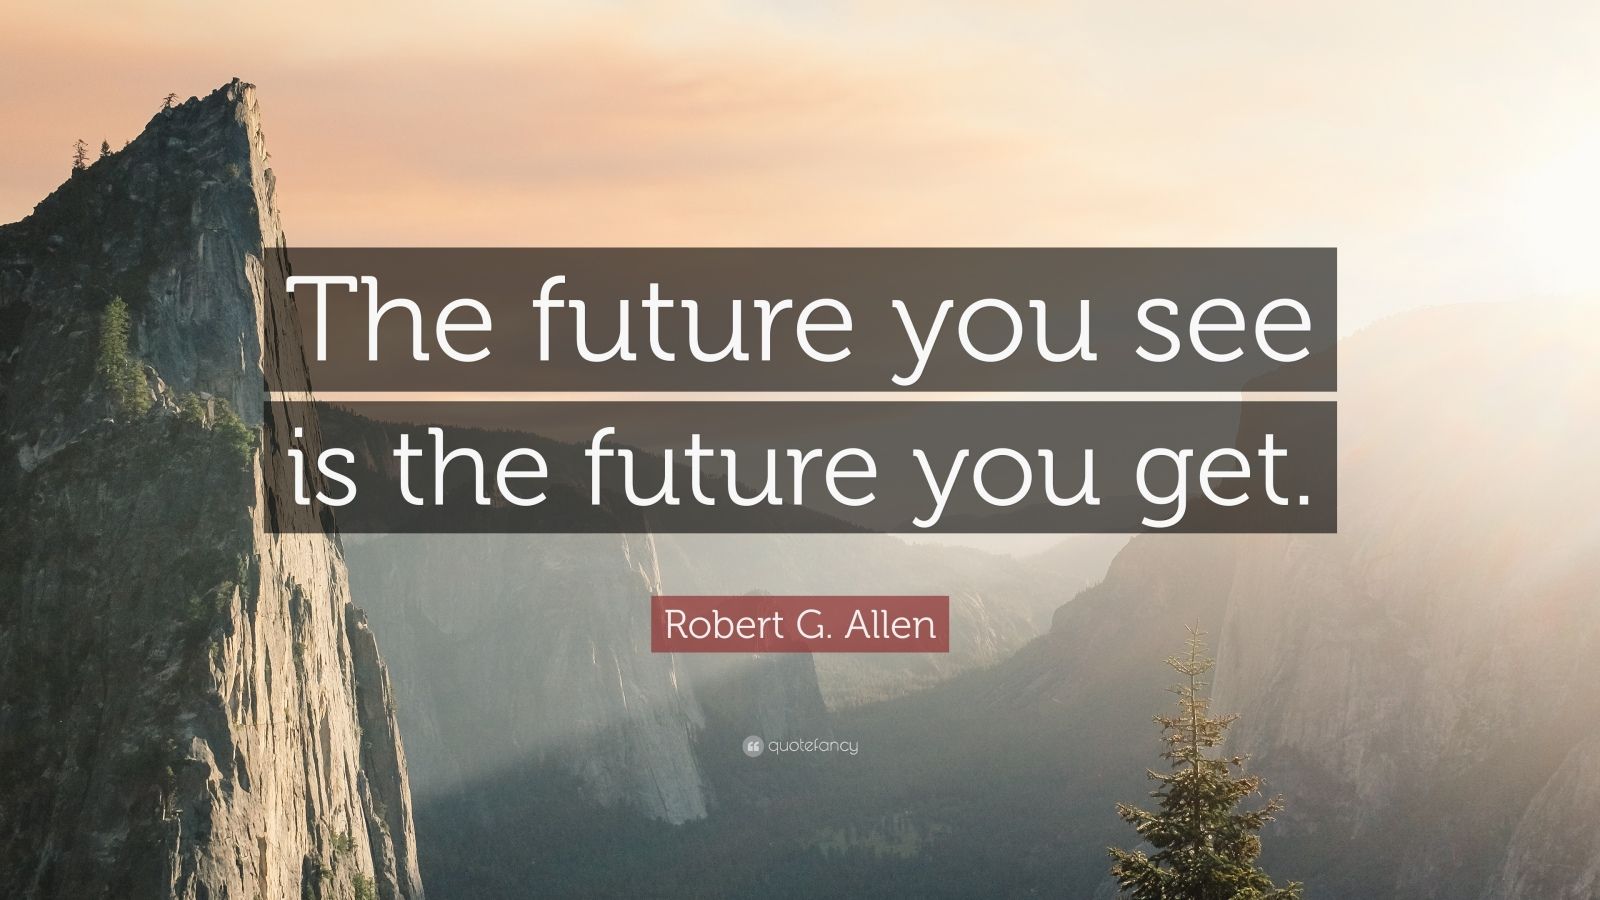 Robert G. Allen Quote: "The future you see is the future you get."